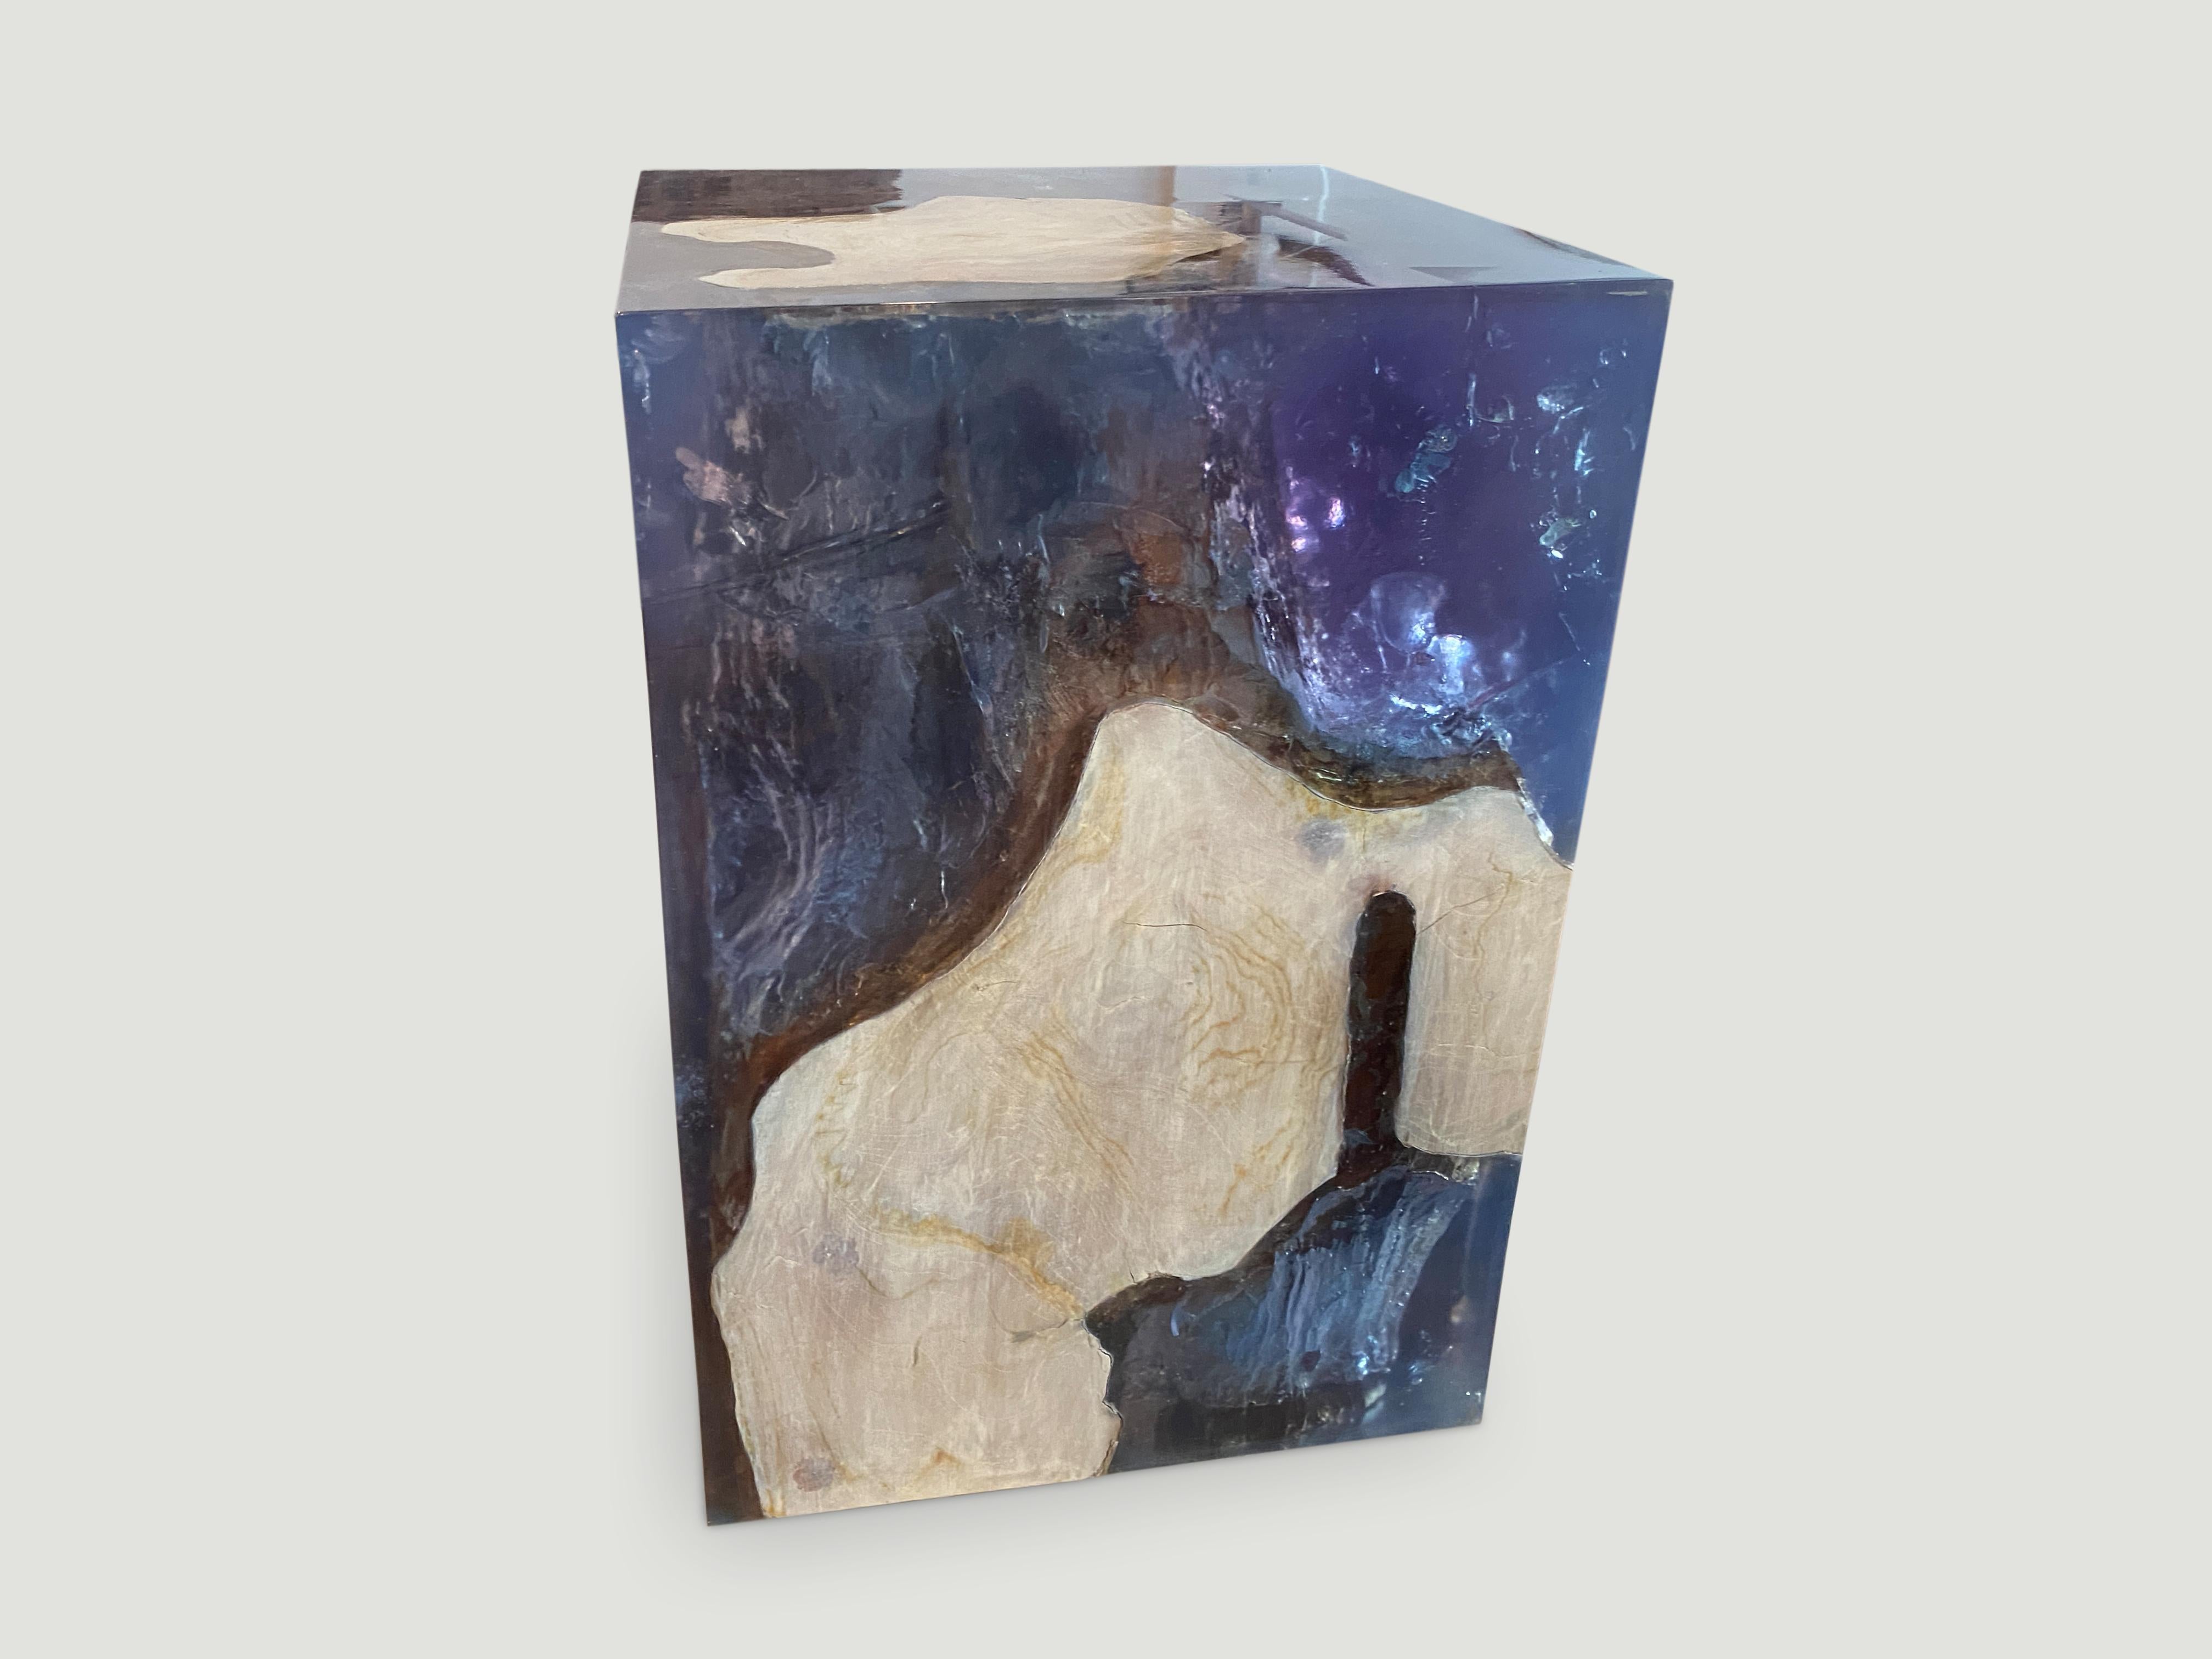 The St. Barts side table is a unique variation of the teak and cracked resin cube. Ice blue, aqua resin or new to 2020 deep sea blue resin, is cracked and added into the natural grooves of the bleached teak wood and finally sanded and finished with